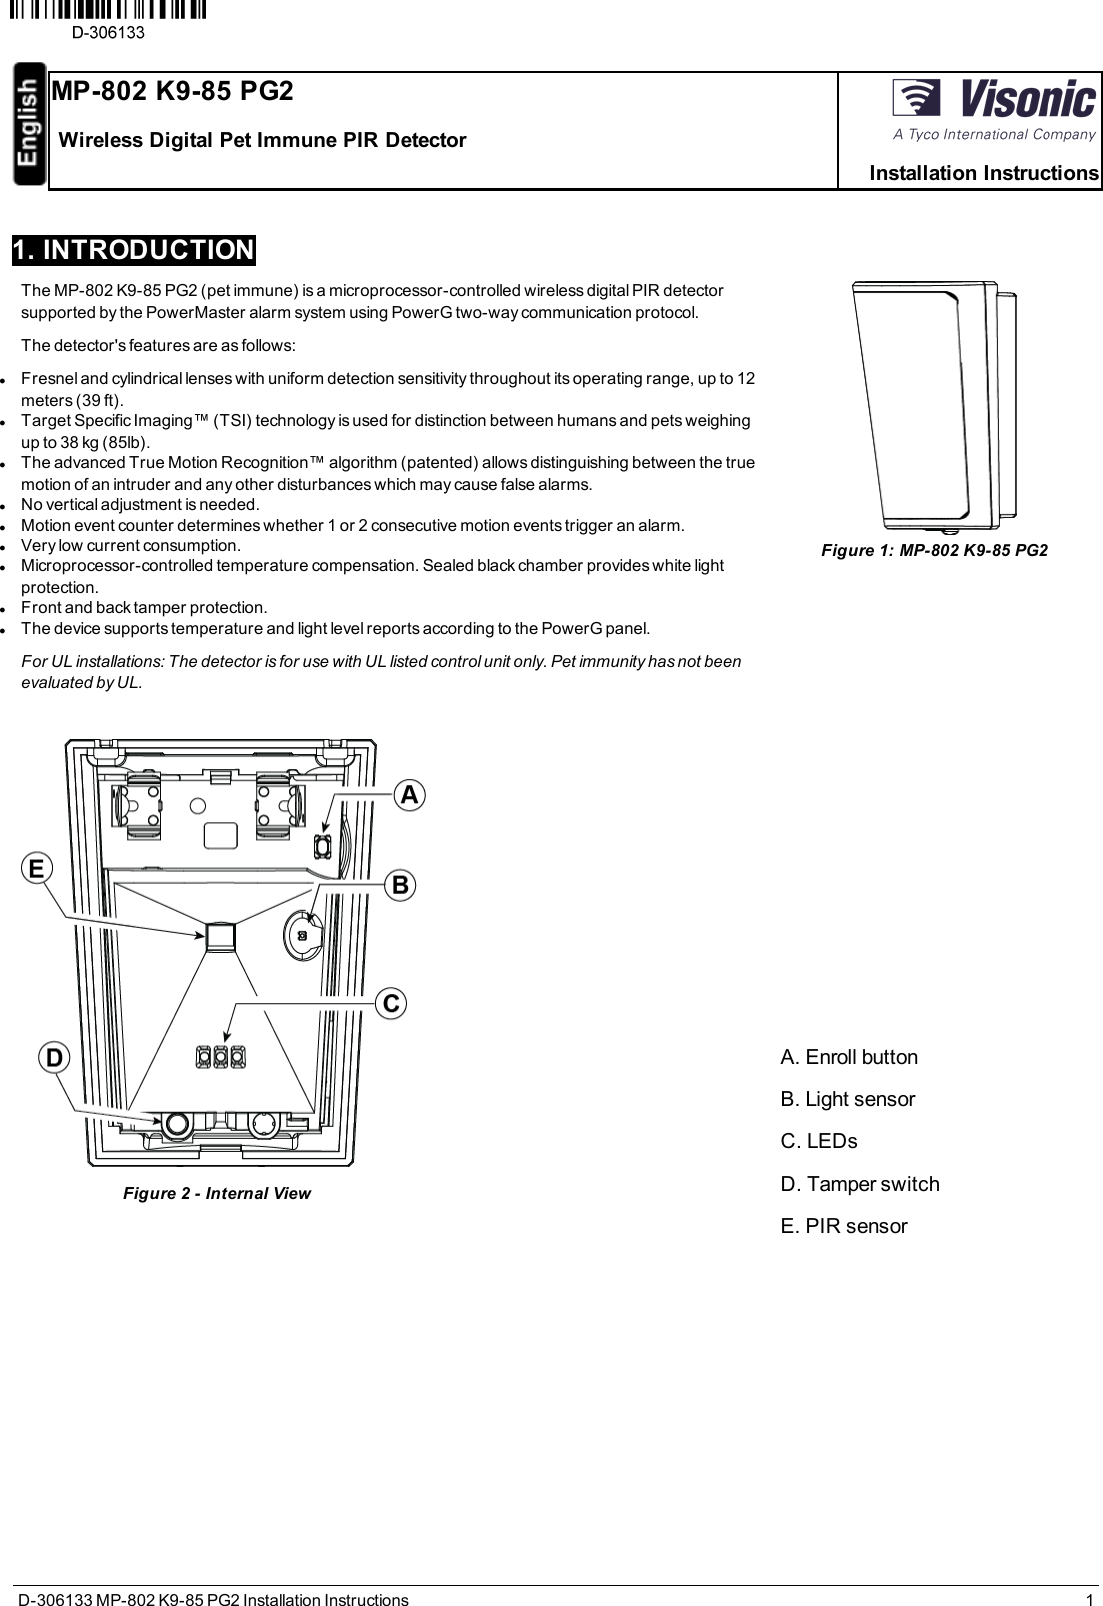 D-306133 MP-802 K9-85 PG2 Installation Instructions 11. INTRODUCTIONThe MP-802 K9-85 PG2 (pet immune) is a microprocessor-controlled wireless digital PIR detectorsupported by the PowerMaster alarm system using PowerG two-way communication protocol.The detector&apos;s features are as follows:lFresnel and cylindrical lenses with uniform detection sensitivity throughout its operating range, up to 12meters (39 ft).lTarget Specific Imaging™ (TSI) technology is used for distinction between humans and pets weighingup to 38 kg (85lb).lThe advanced True Motion Recognition™ algorithm (patented) allows distinguishing between the truemotion of an intruder and any other disturbances which may cause false alarms.lNo vertical adjustment is needed.lMotion event counter determines whether 1 or 2 consecutive motion events trigger an alarm.lVery low current consumption.lMicroprocessor-controlled temperature compensation. Sealed black chamber provides white lightprotection.lFront and back tamper protection.lThe device supports temperature and light level reports according to the PowerG panel.For UL installations: The detector is for use with UL listed control unit only. Pet immunity has not beenevaluated by UL.............. ........Figure 2 - Internal ViewFigure 1: MP-802 K9-85 PG2A. Enroll buttonB. Light sensorC. LEDsD. Tamper switchE. PIR sensorMP-802 K9-85 PG2Wireless Digital Pet Immune PIR DetectorInstallation Instructions